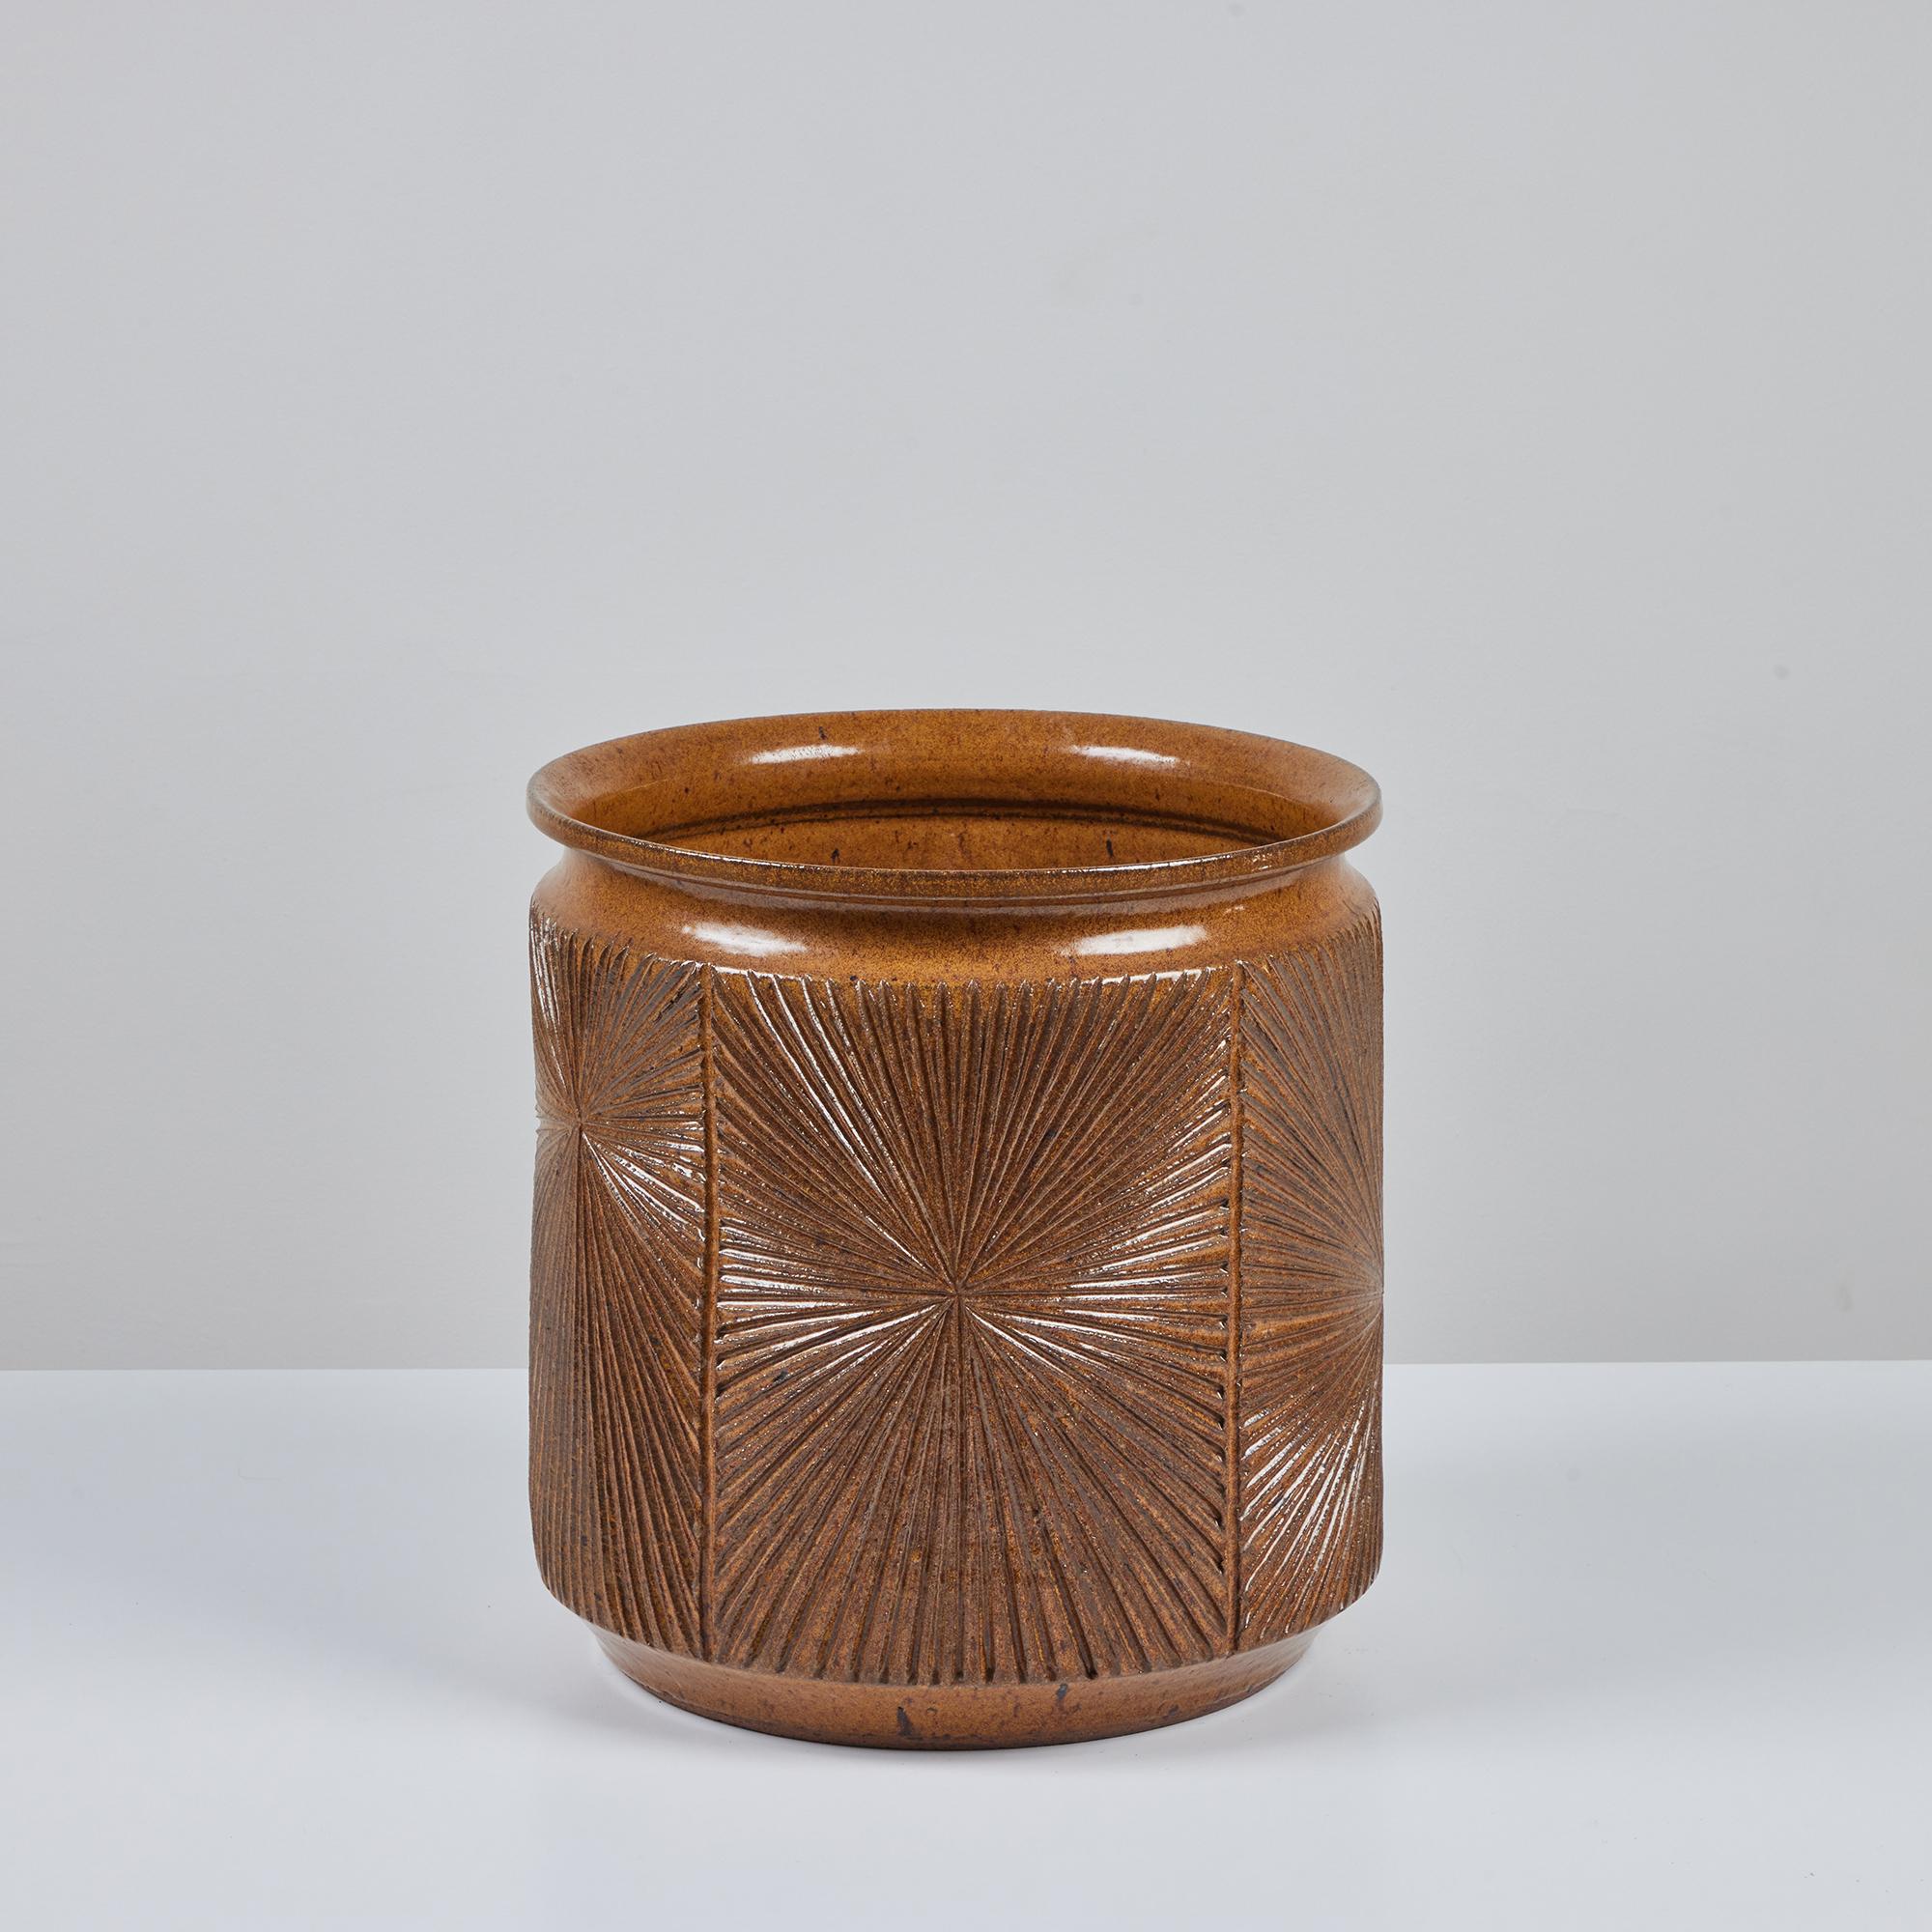 Hand thrown stoneware planter from Earthgender, David Cressey and Robert Maxwell’s early 1970s project. This 13” diameter example is incised in the “Sunburst” design a pattern of lines radiating from a central point. The exterior and interior of the